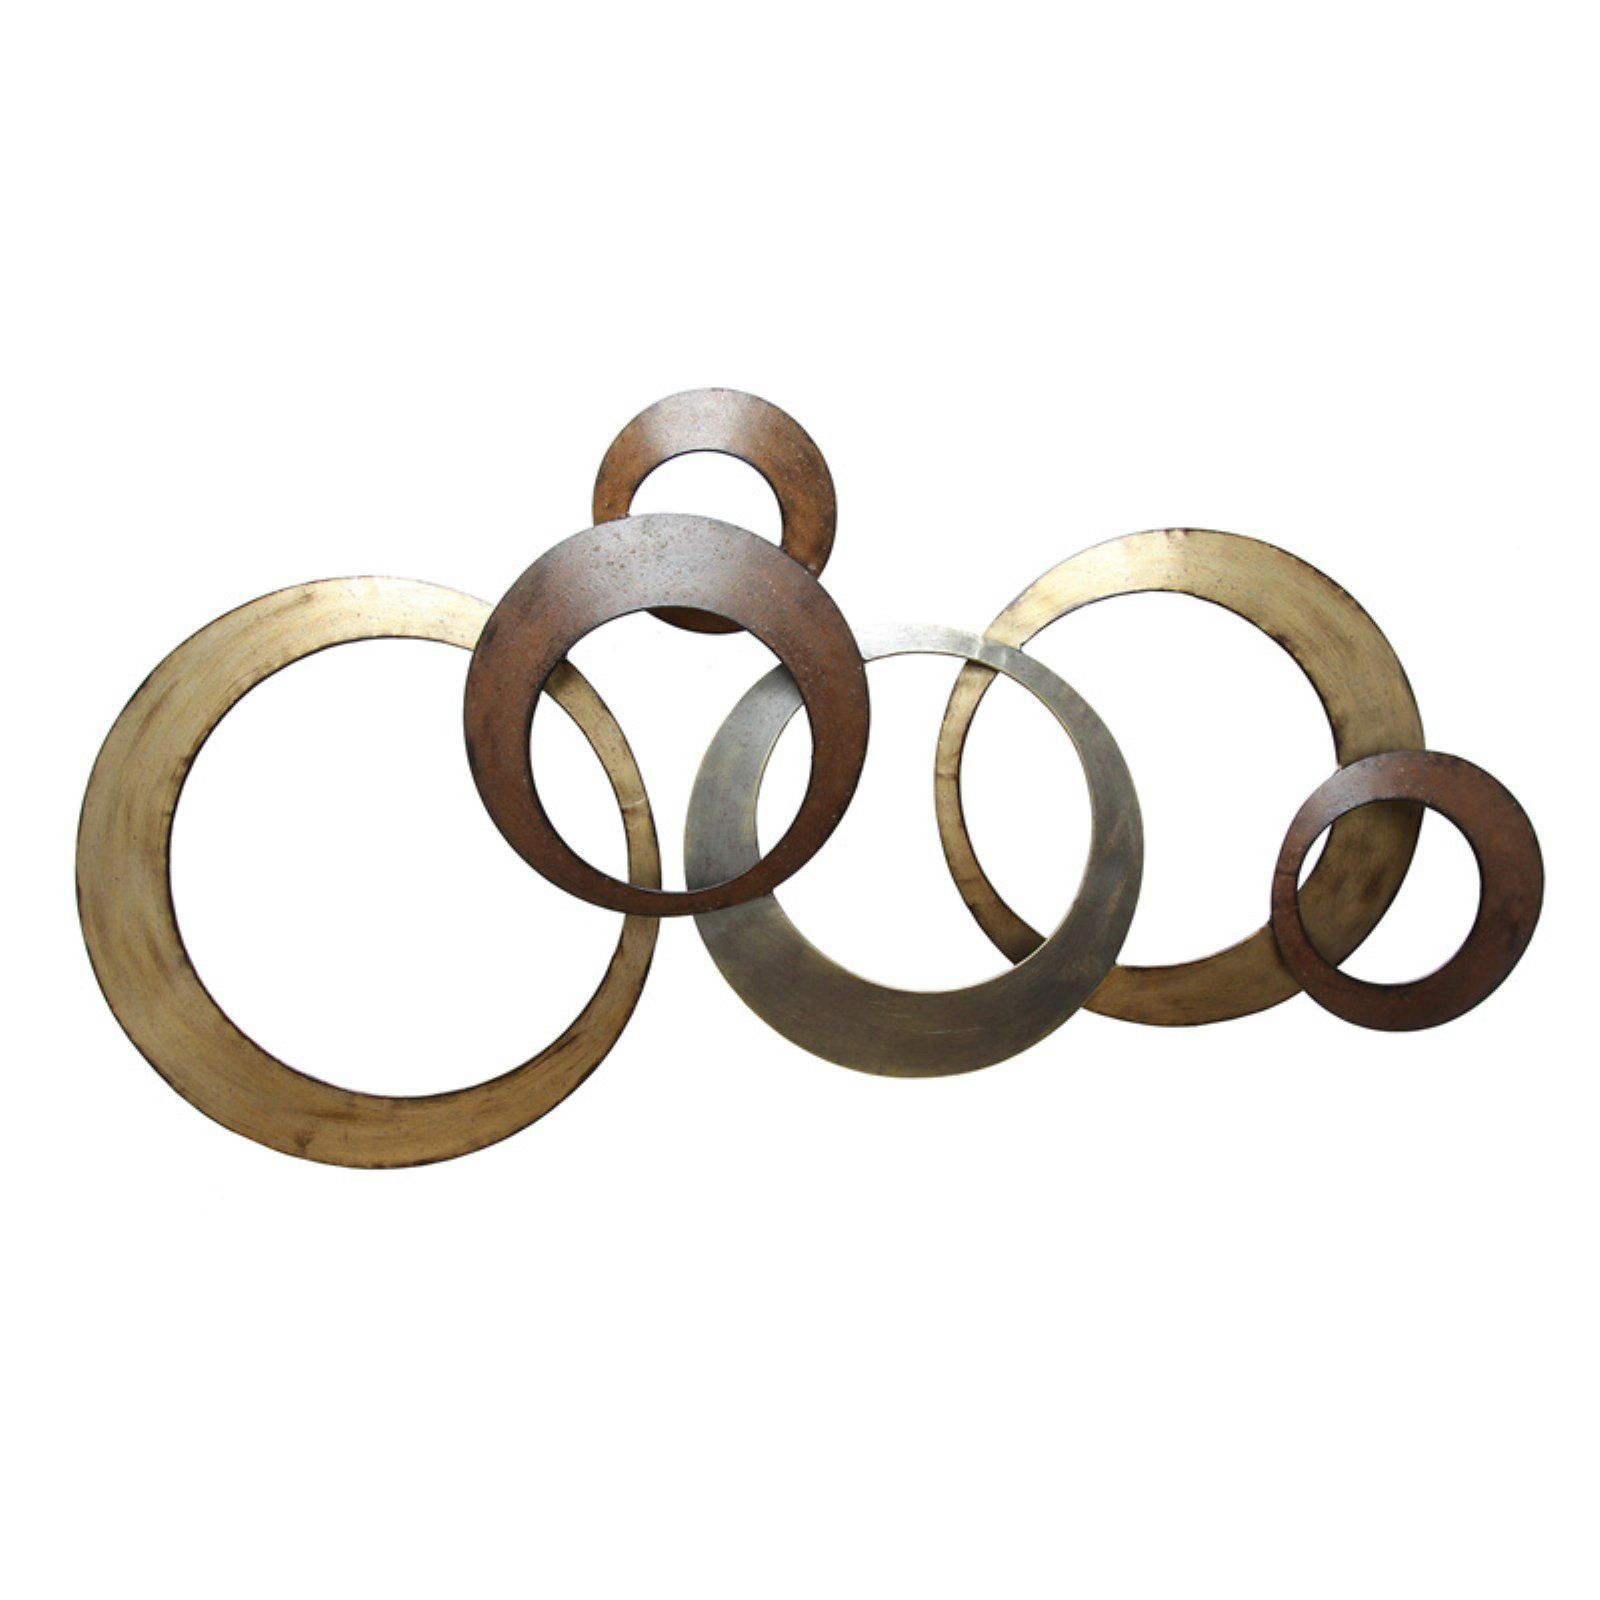 Stratton Home Decor Metallic Rings Wall Decor Pertaining To Rings Wall Decor (View 27 of 30)